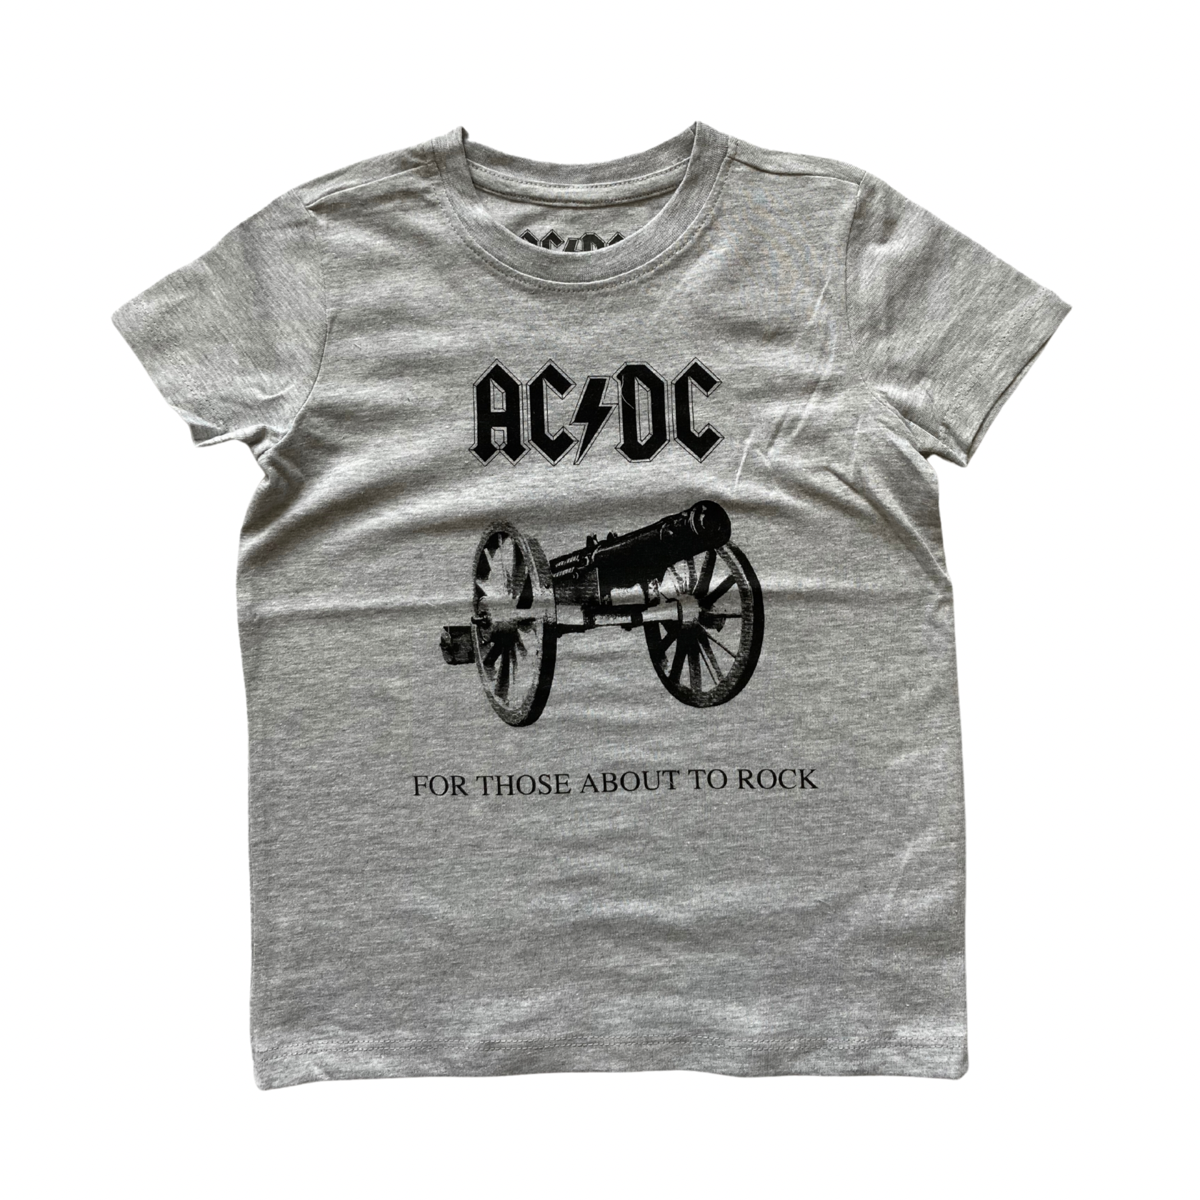 AC/DC For Those About to Rock Grey Kids T-Shirt - AC/DC